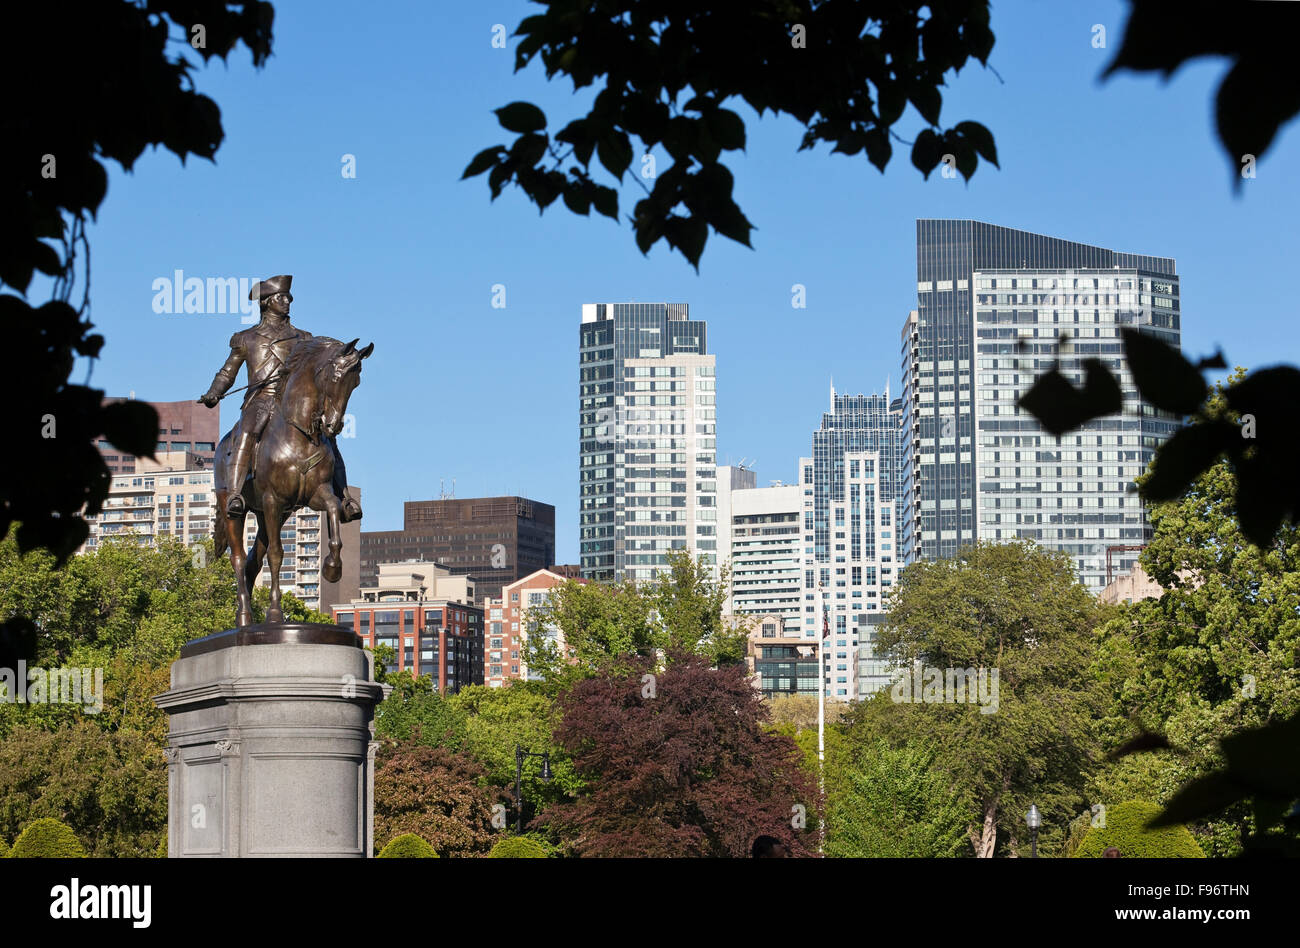 View from west end of Boston Public Garden towards the city centre. The bronze statue on the left is of George Washington and Stock Photo